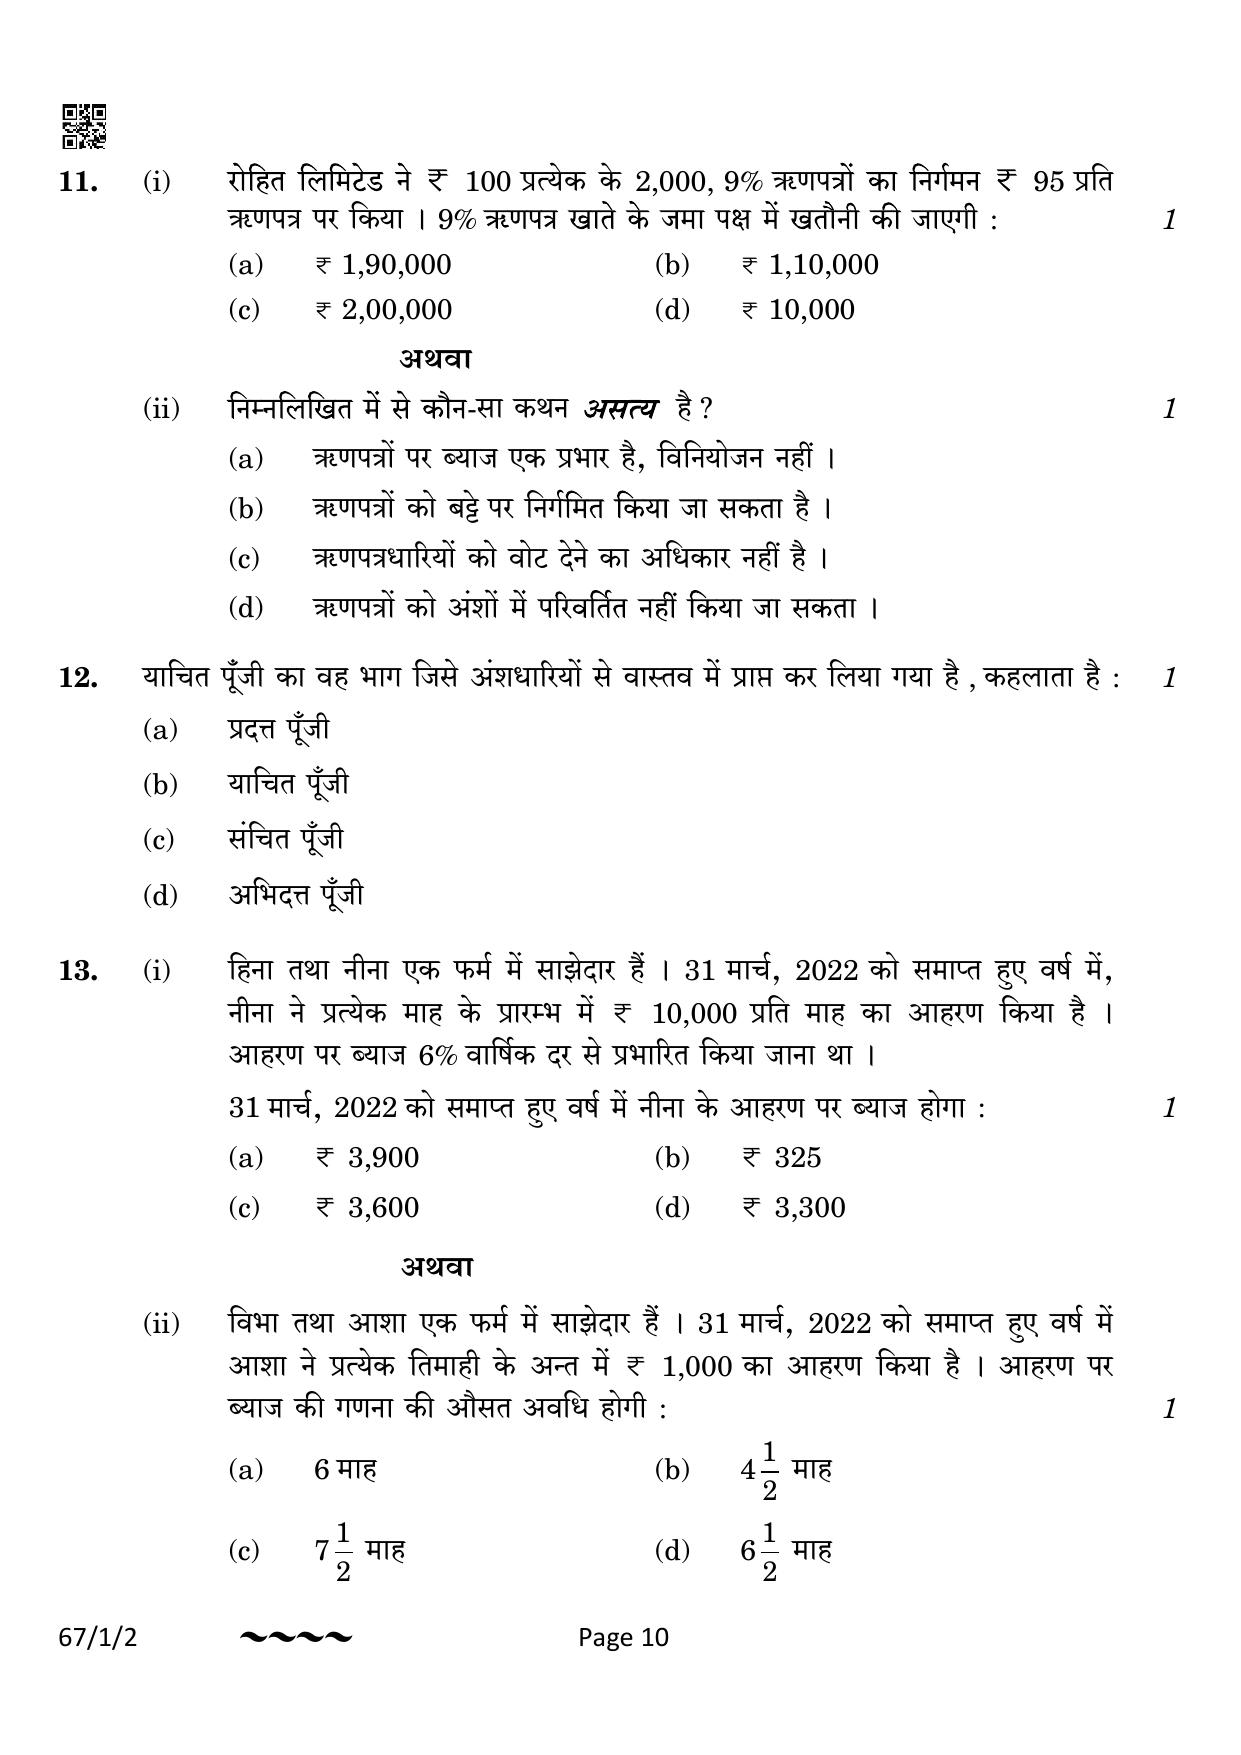 CBSE Class 12 67-1-2 Accountancy 2023 Question Paper - Page 10